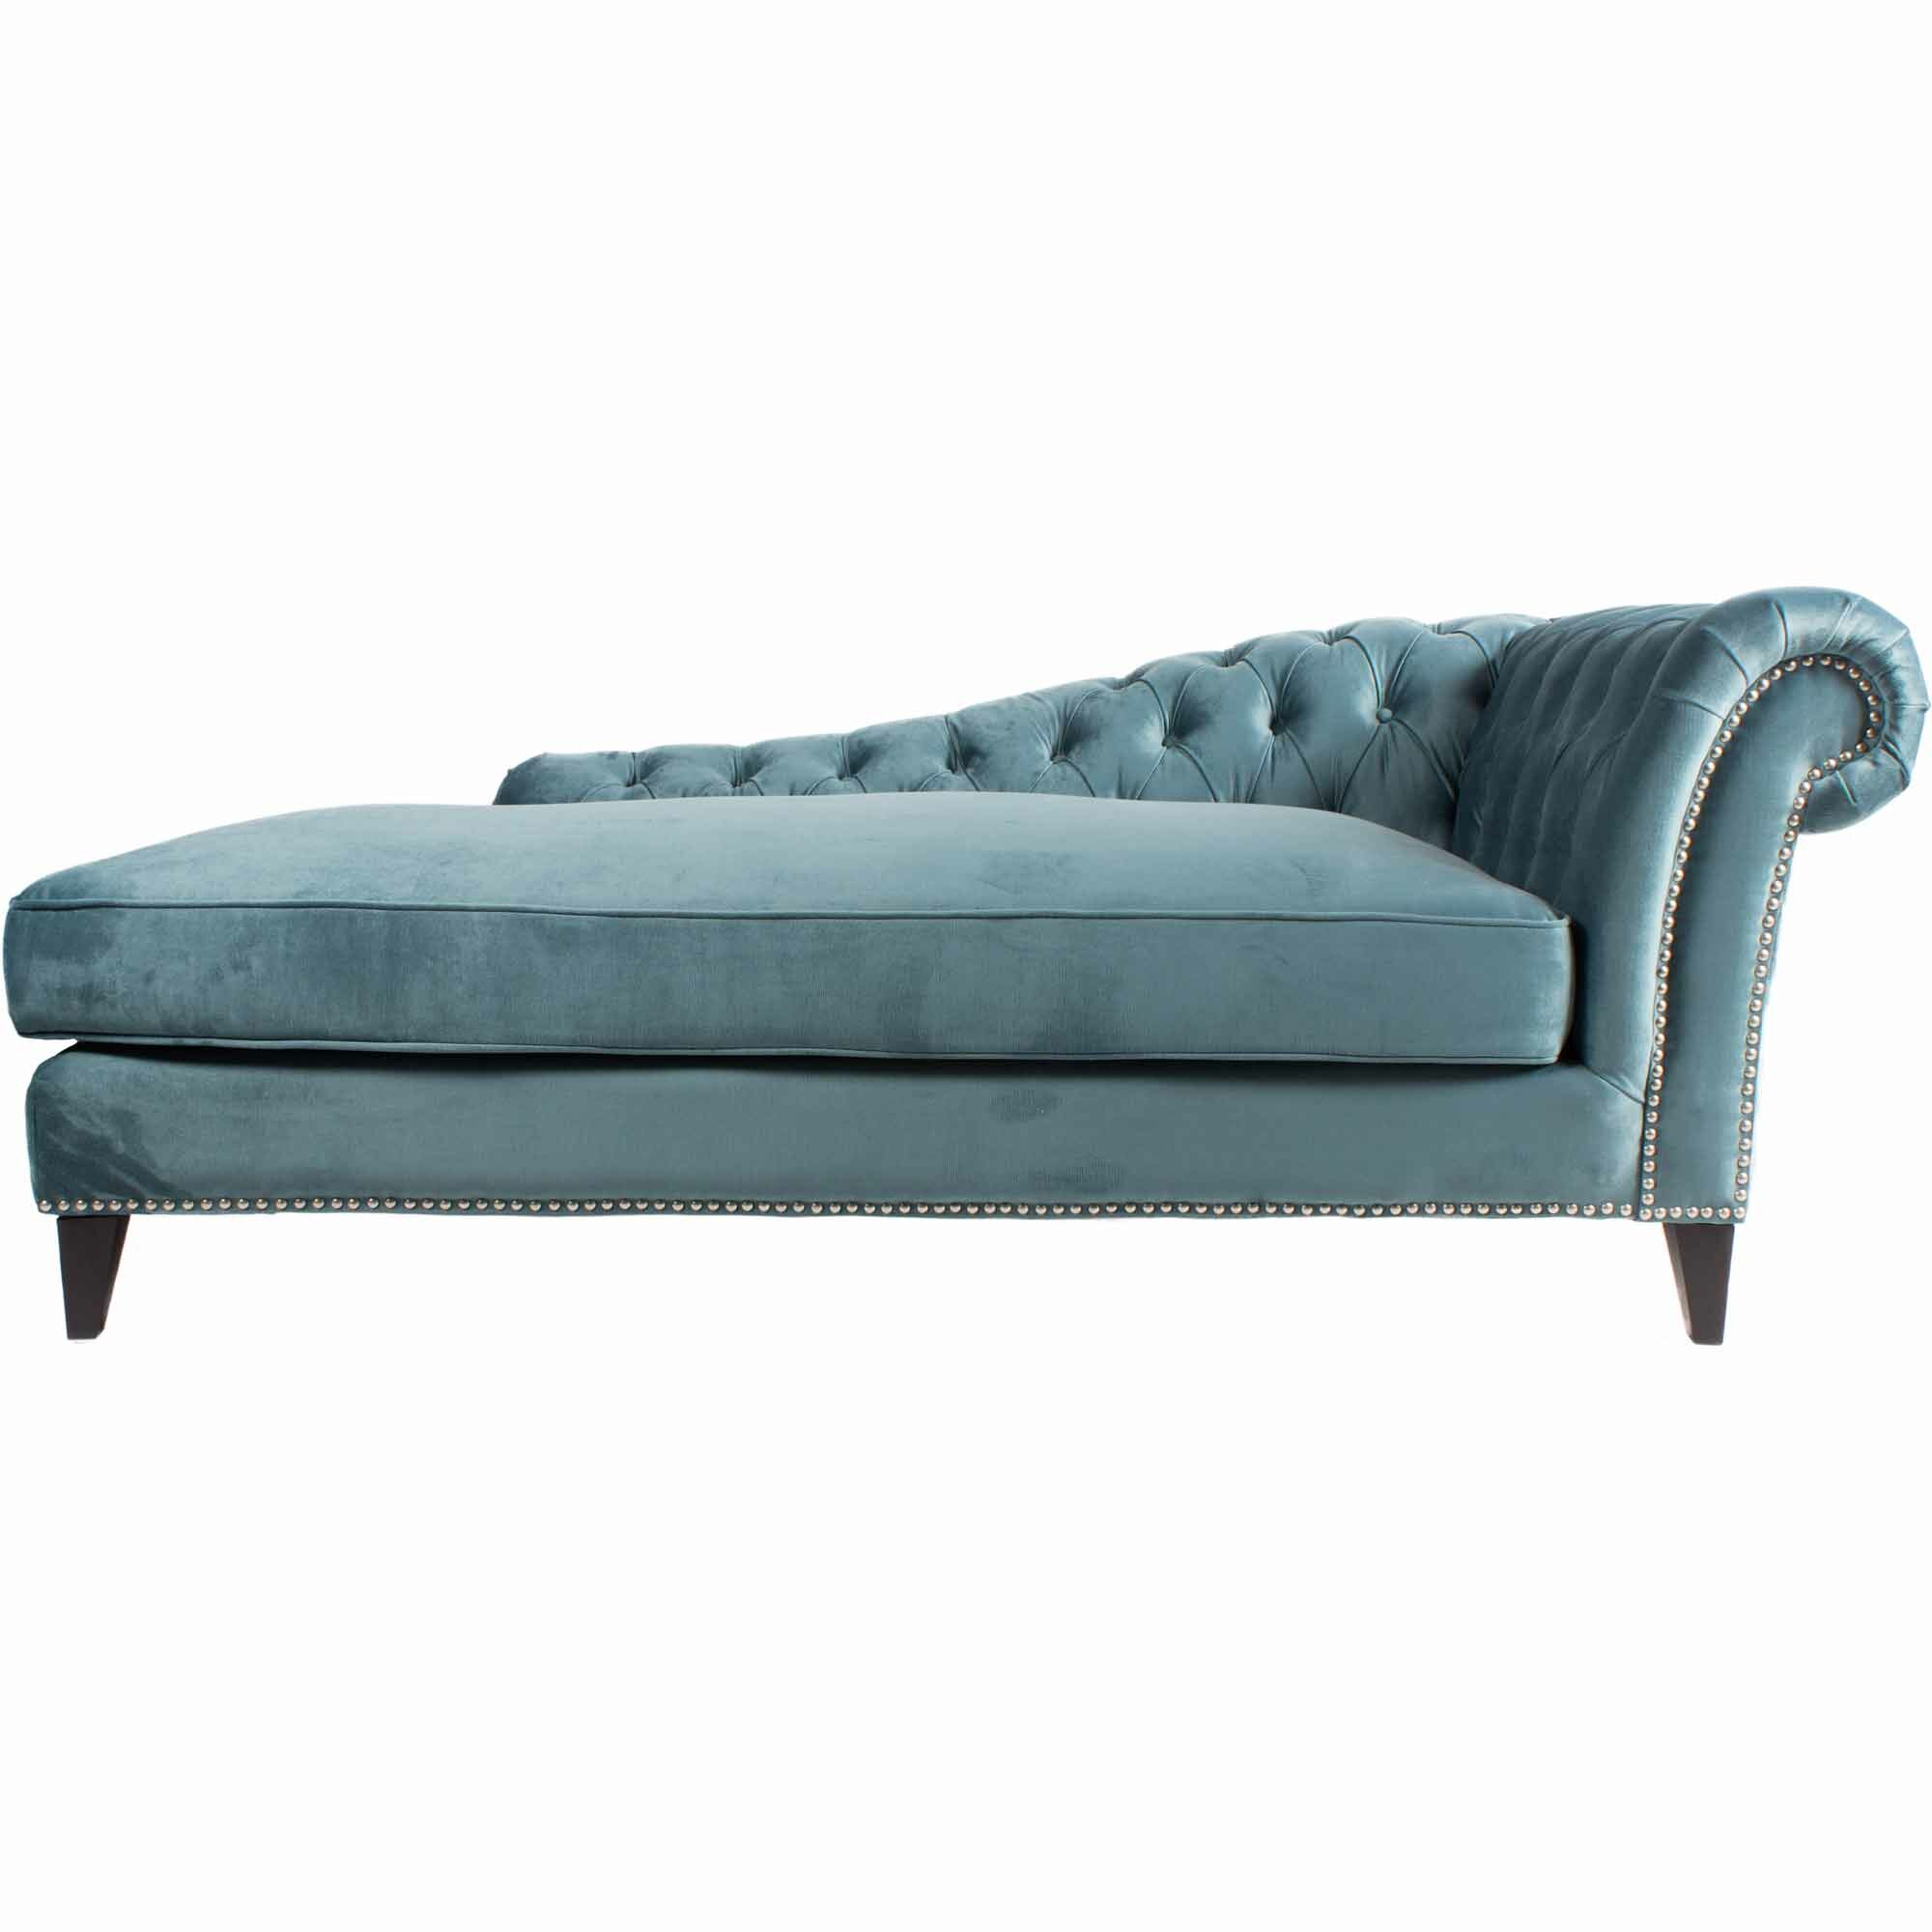 Crosley Upholstered Chaise Lounge